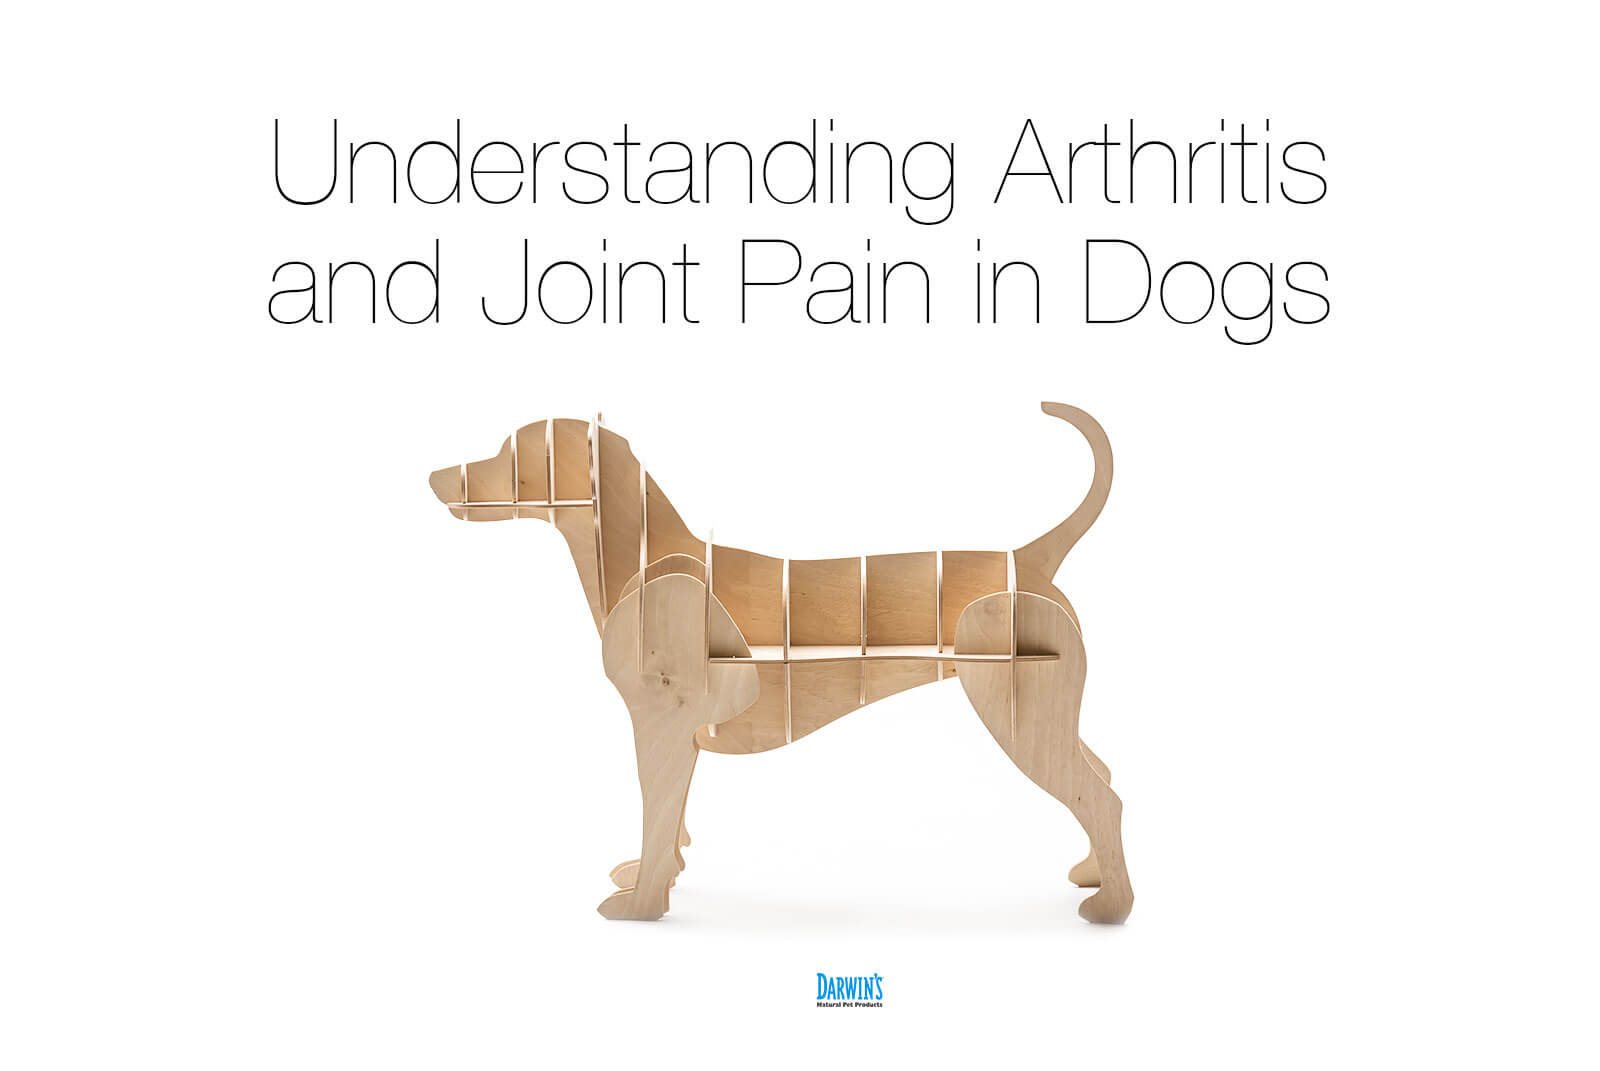 AJh,supplement for dog joint pain,hrdsindia.org